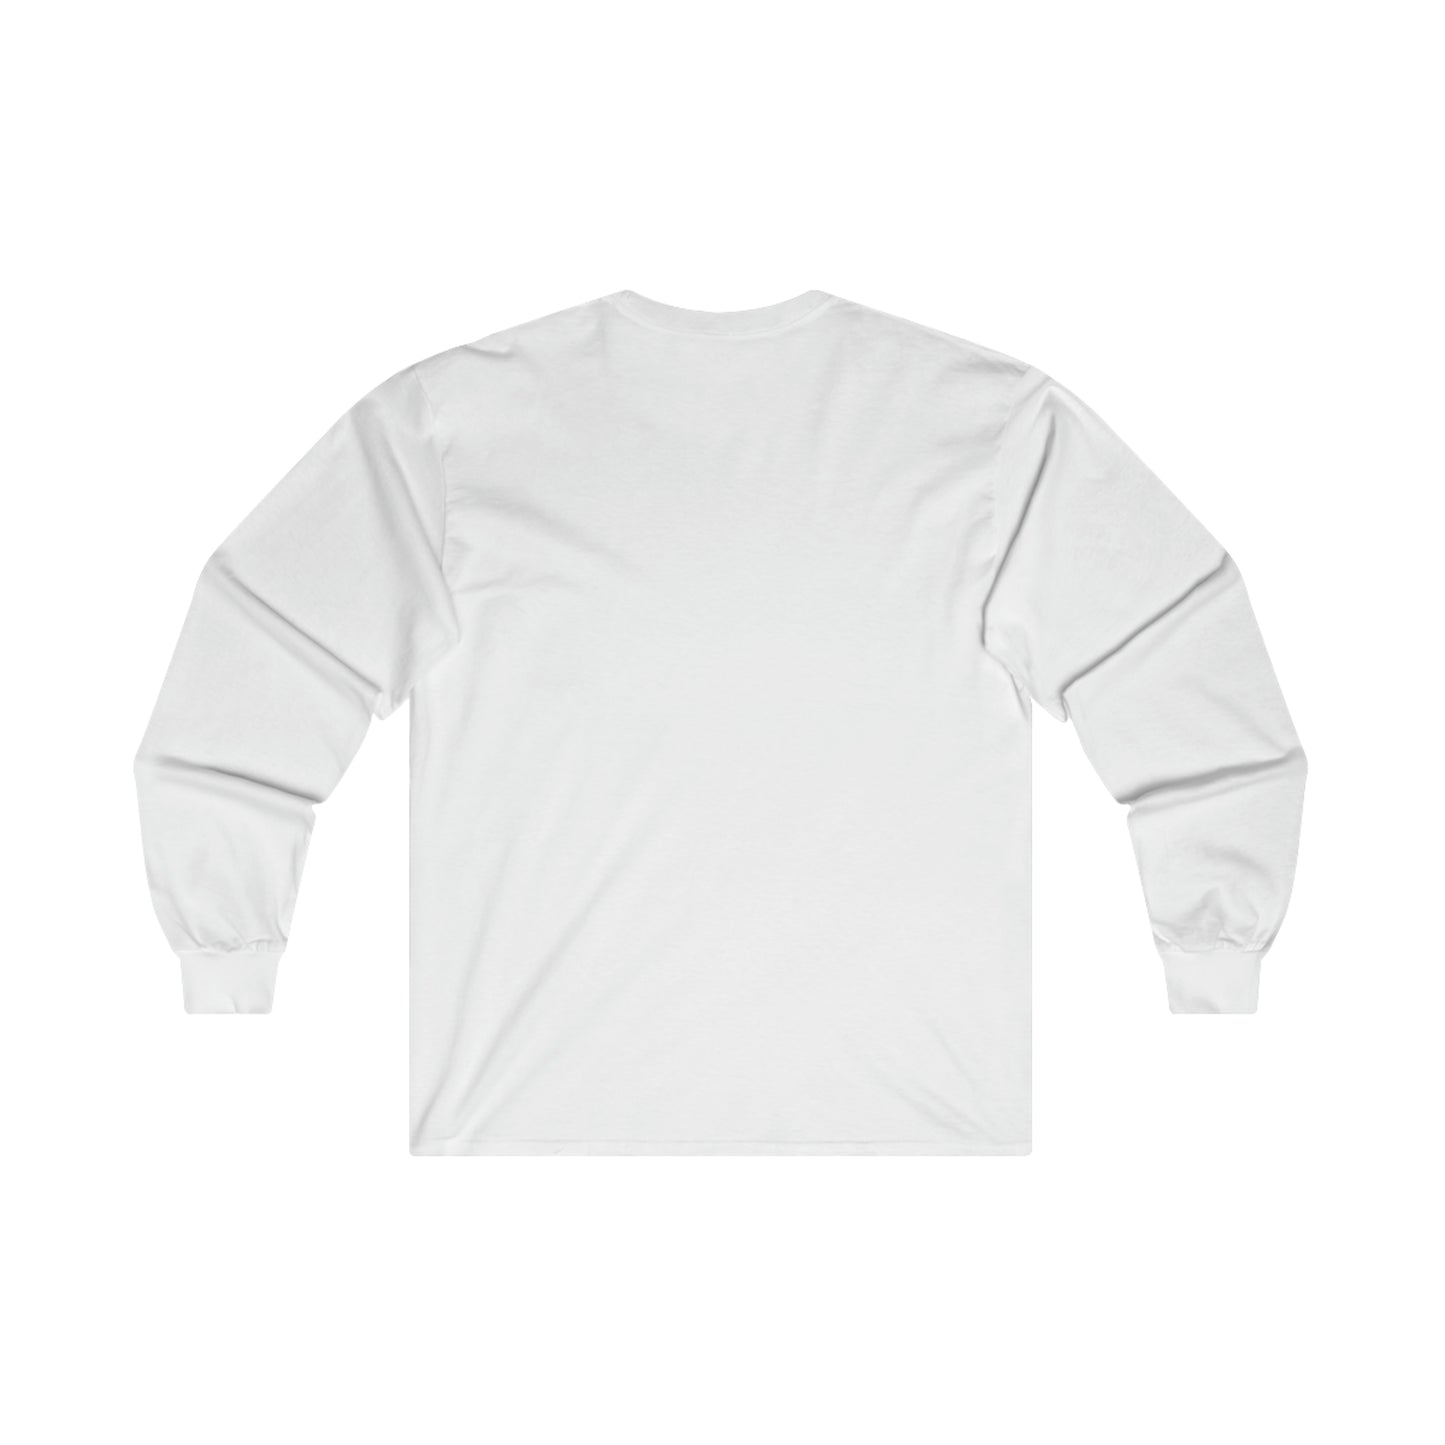 DO NOT under any circumstances give me a cigarette - Ultra Cotton Long Sleeve Tee